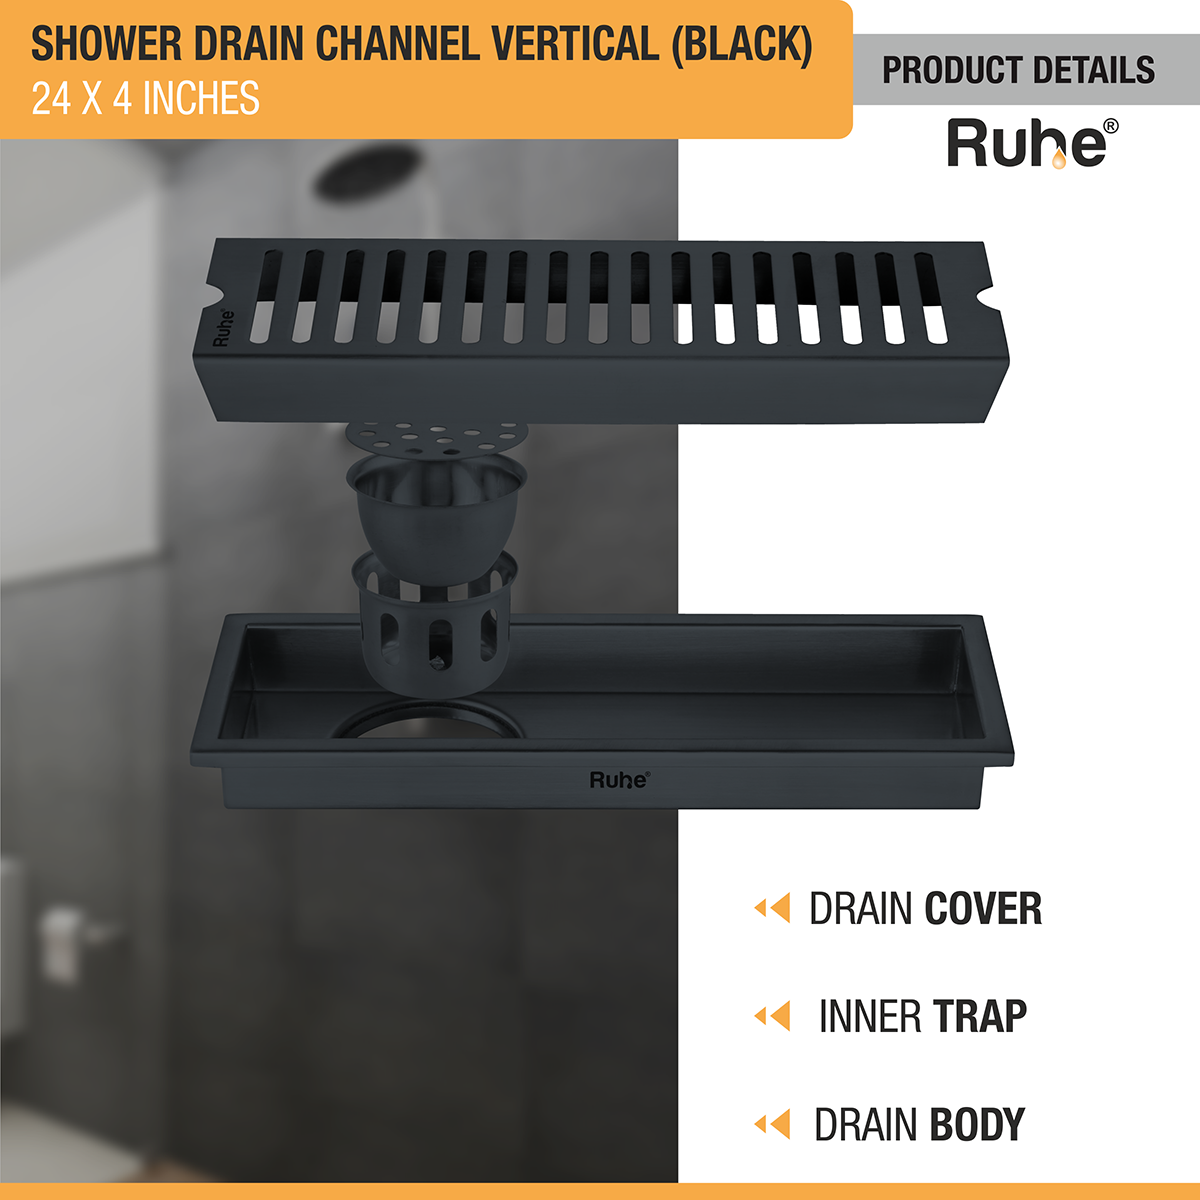 Vertical Shower Drain Channel (24 x 4 Inches) Black PVD Coated with drain cover, inner insect trap, drain body